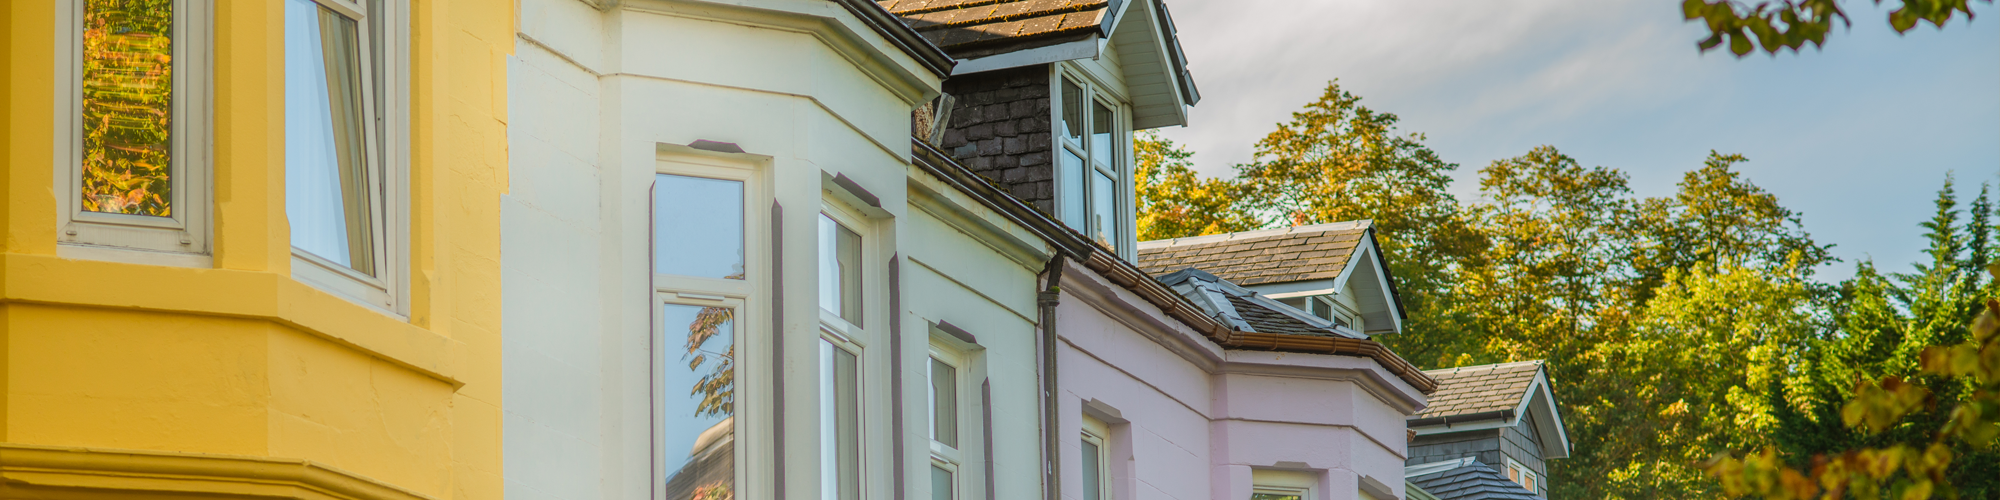 Can I remortgage early? A guide from SAM  Conveyancing. A sunny Victorian terrace with bay and dormer windows 